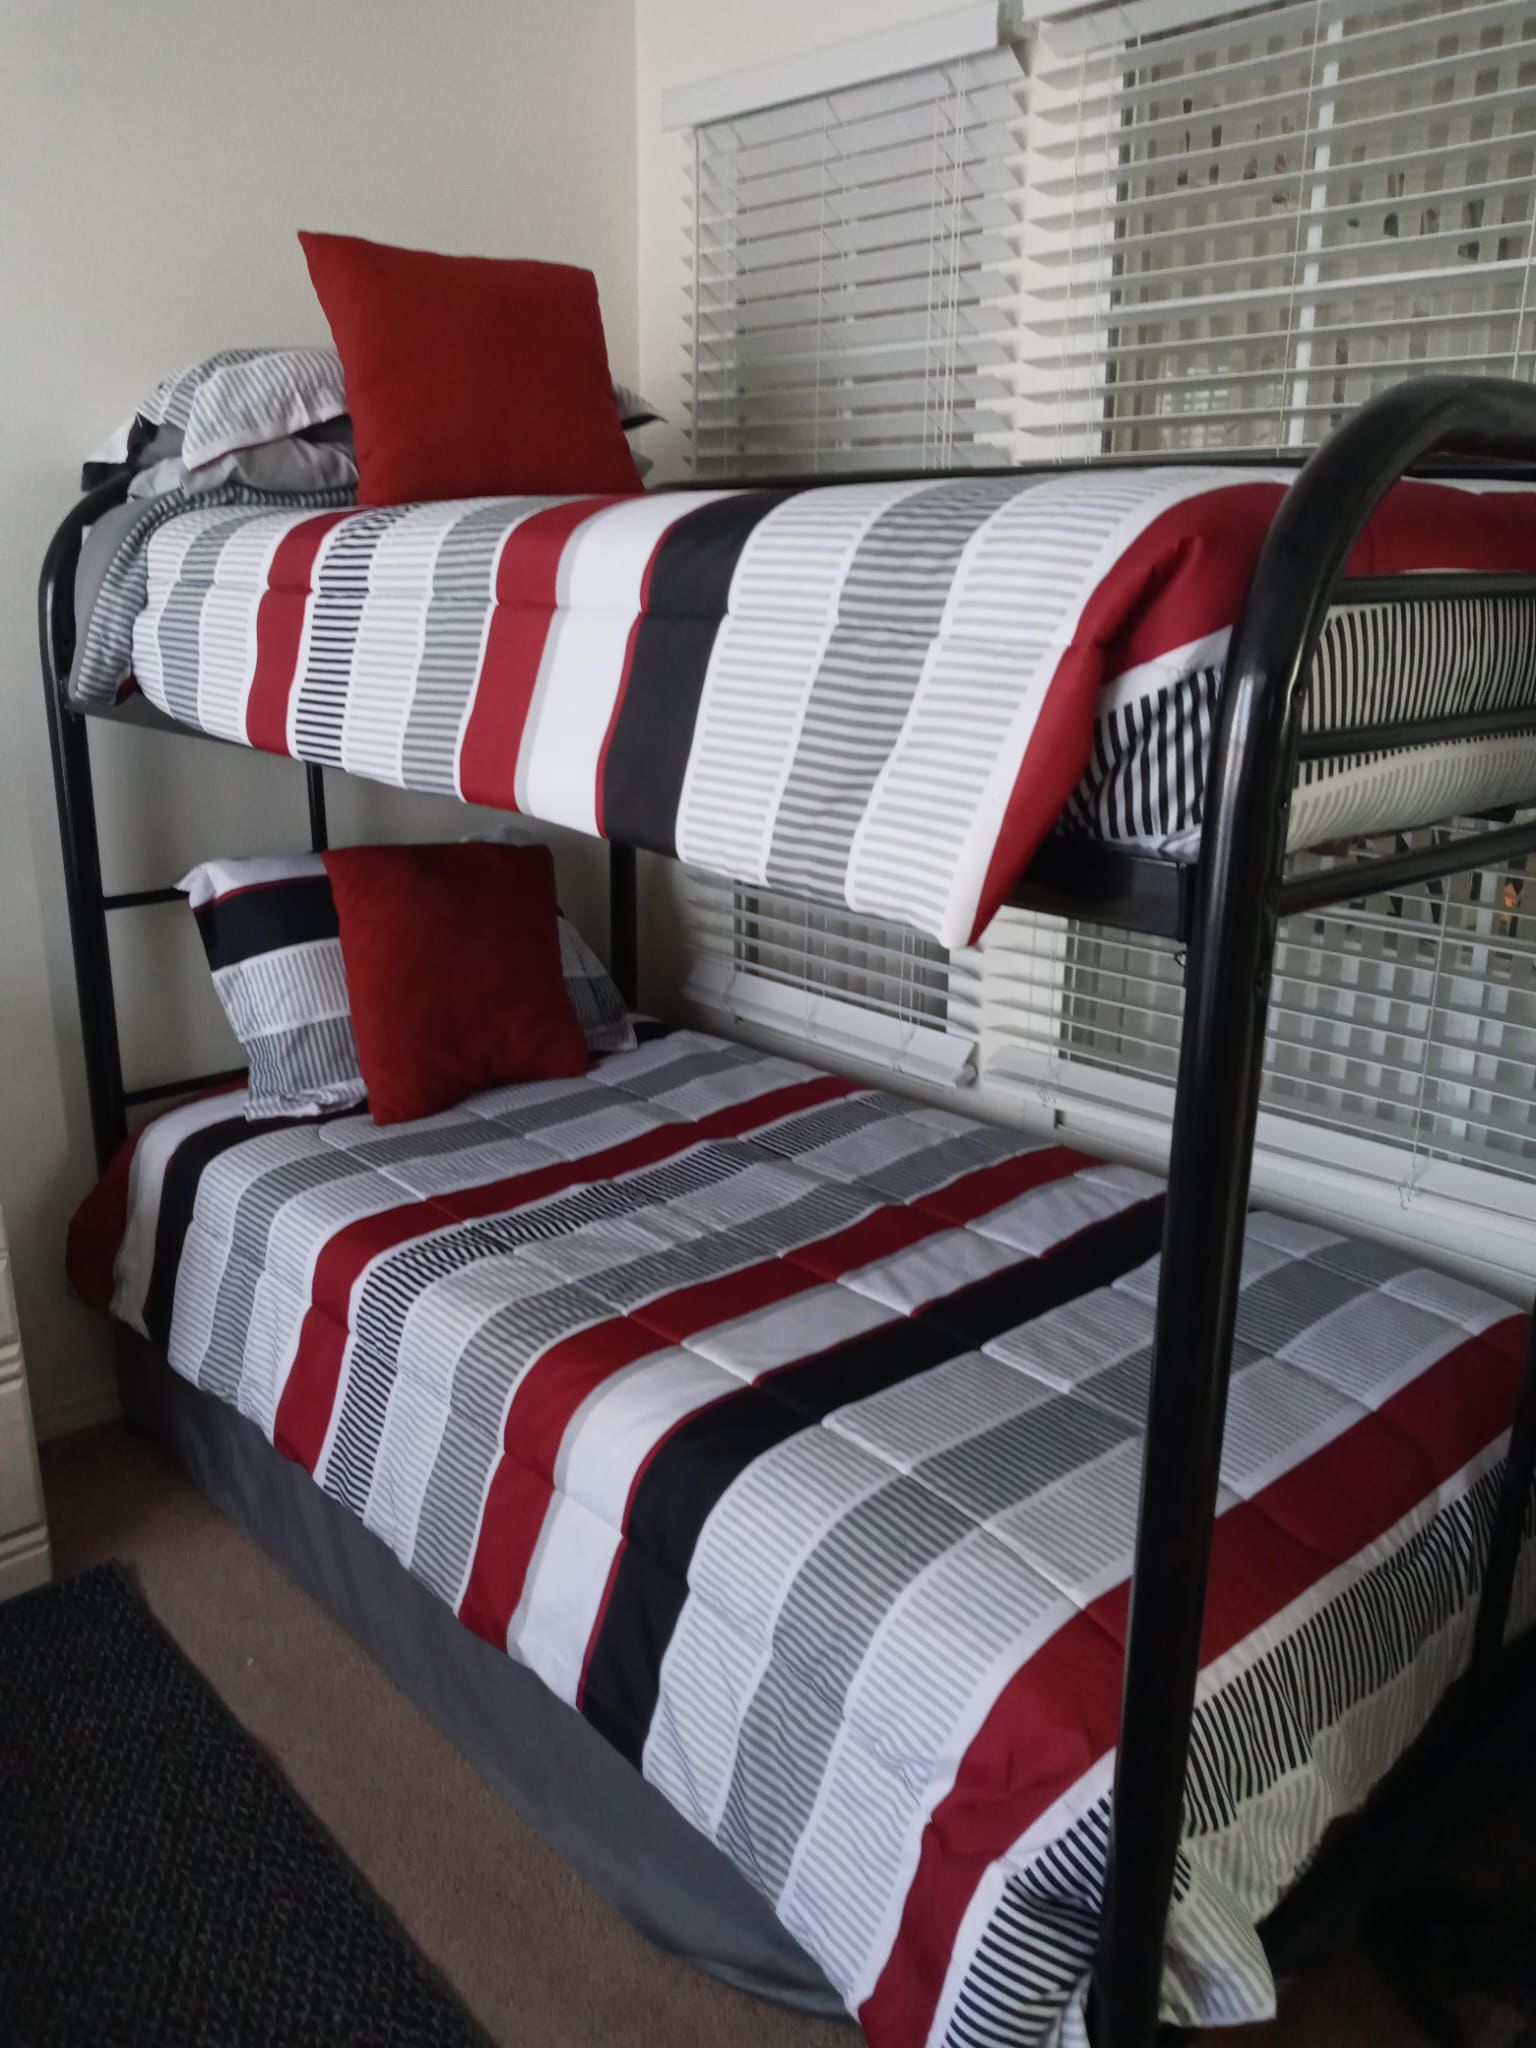 Twin bunk Bed